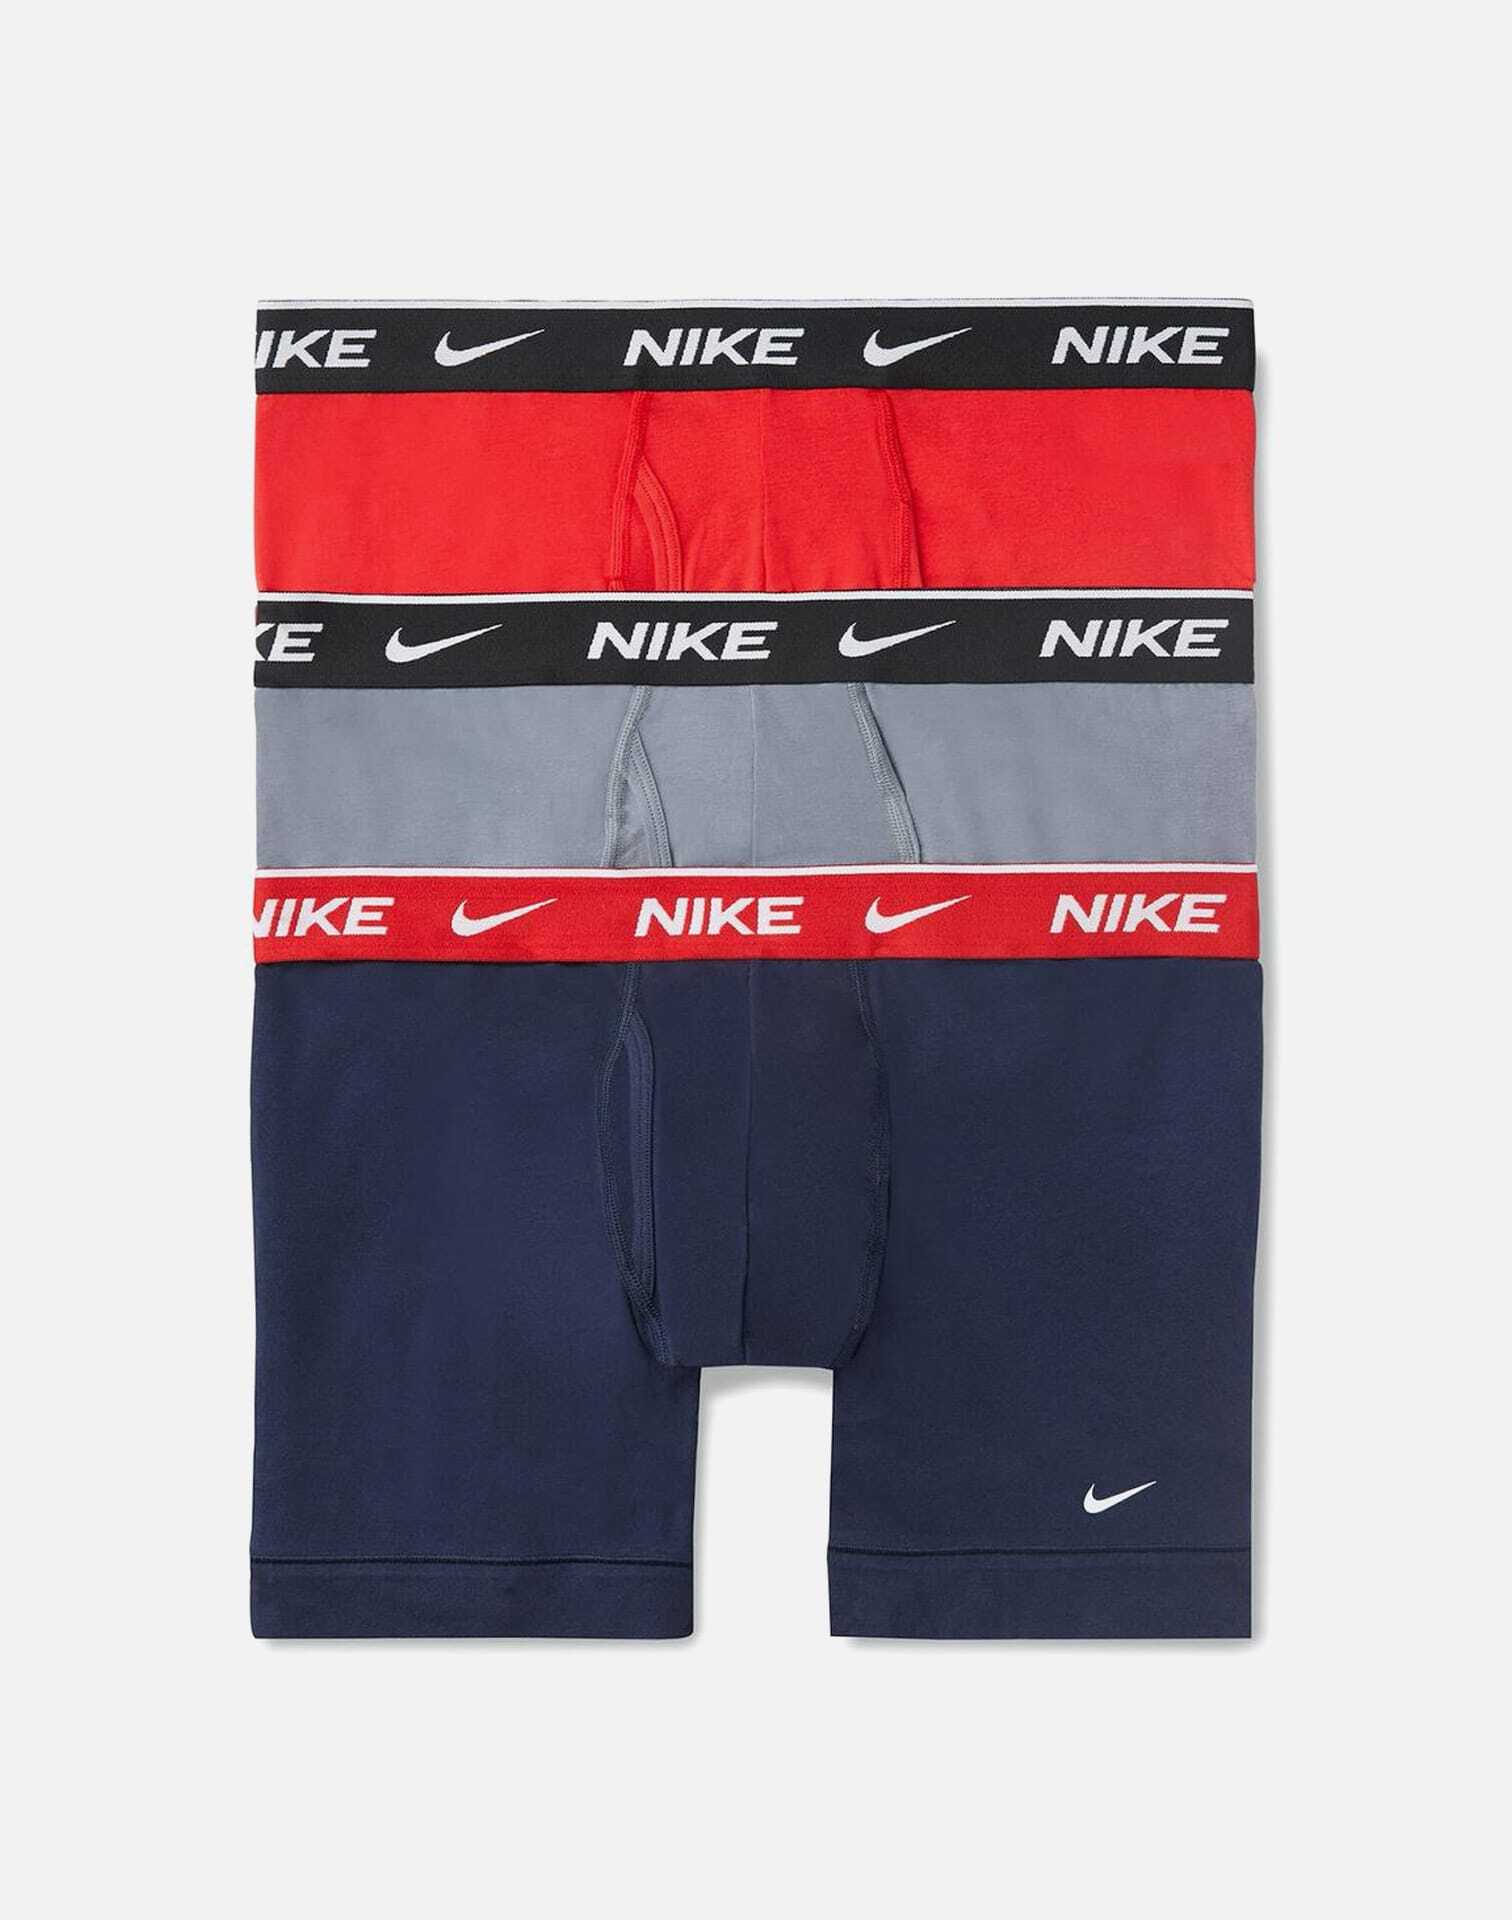 Nike Mens Cotton 3 Pack Brief Boxers - Blue